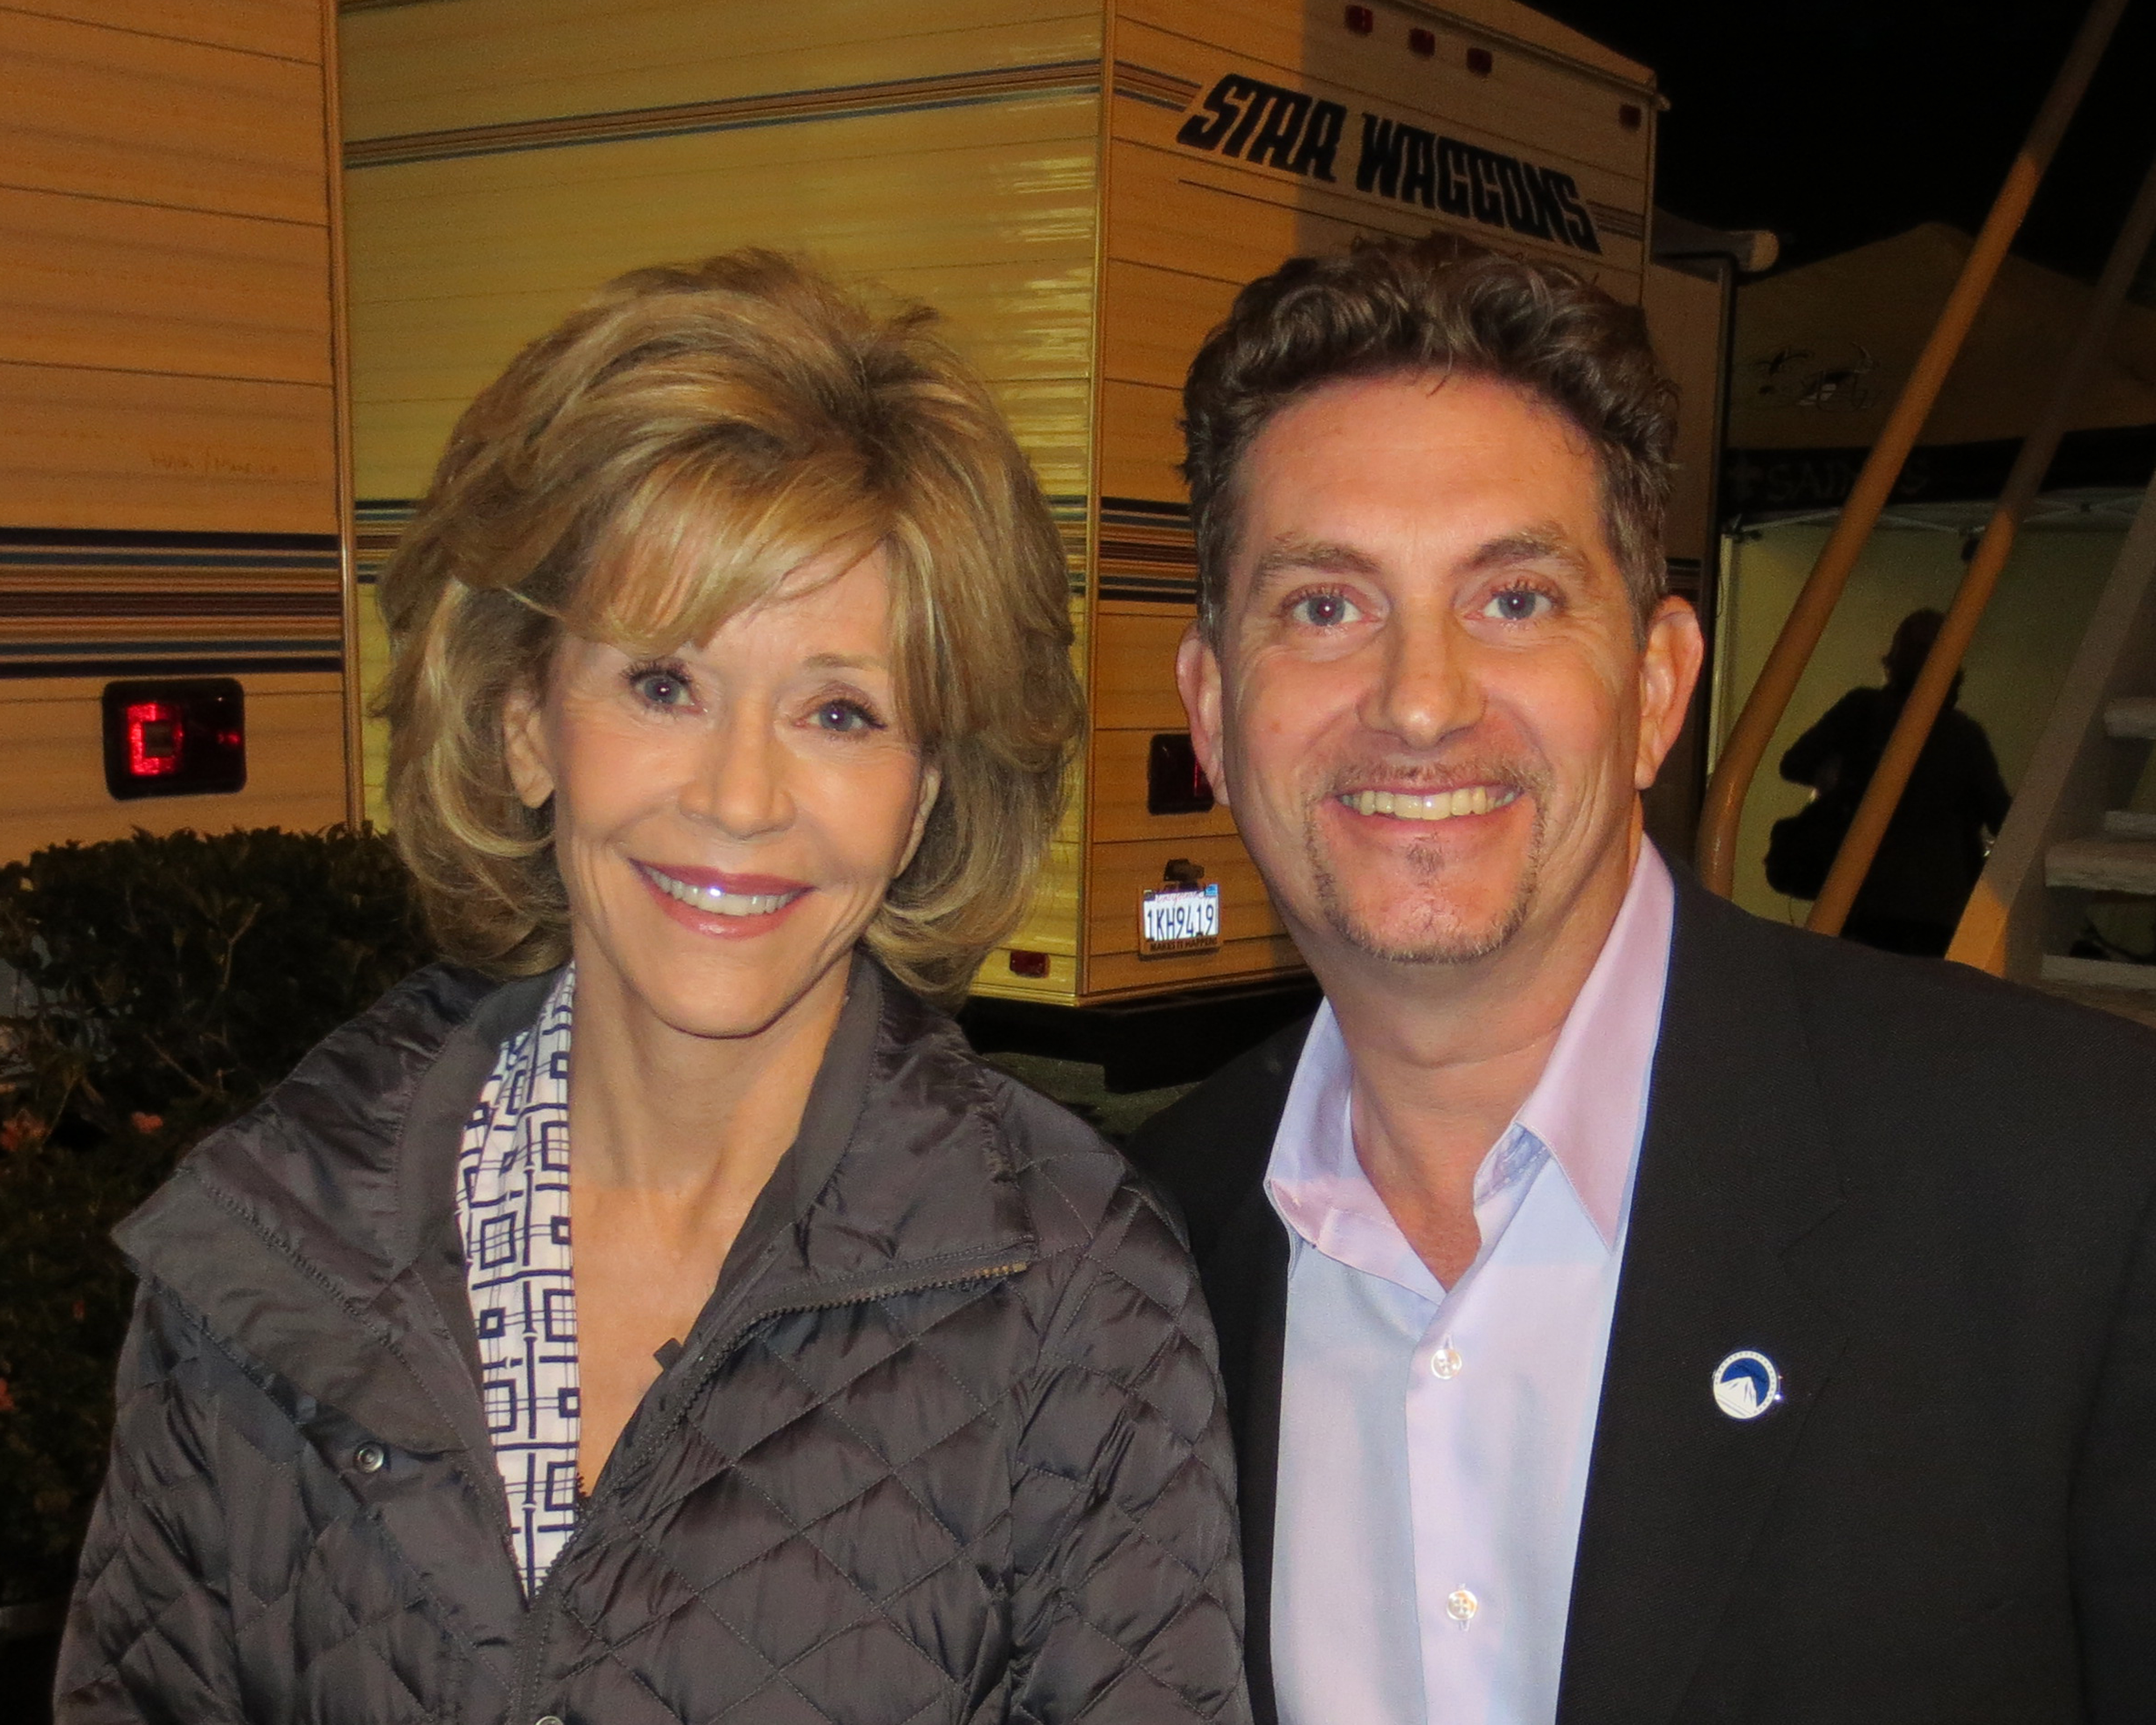 Jane Fonda and Michael Christaldi on the set of Grace and Frankie at Paramount Pictures.